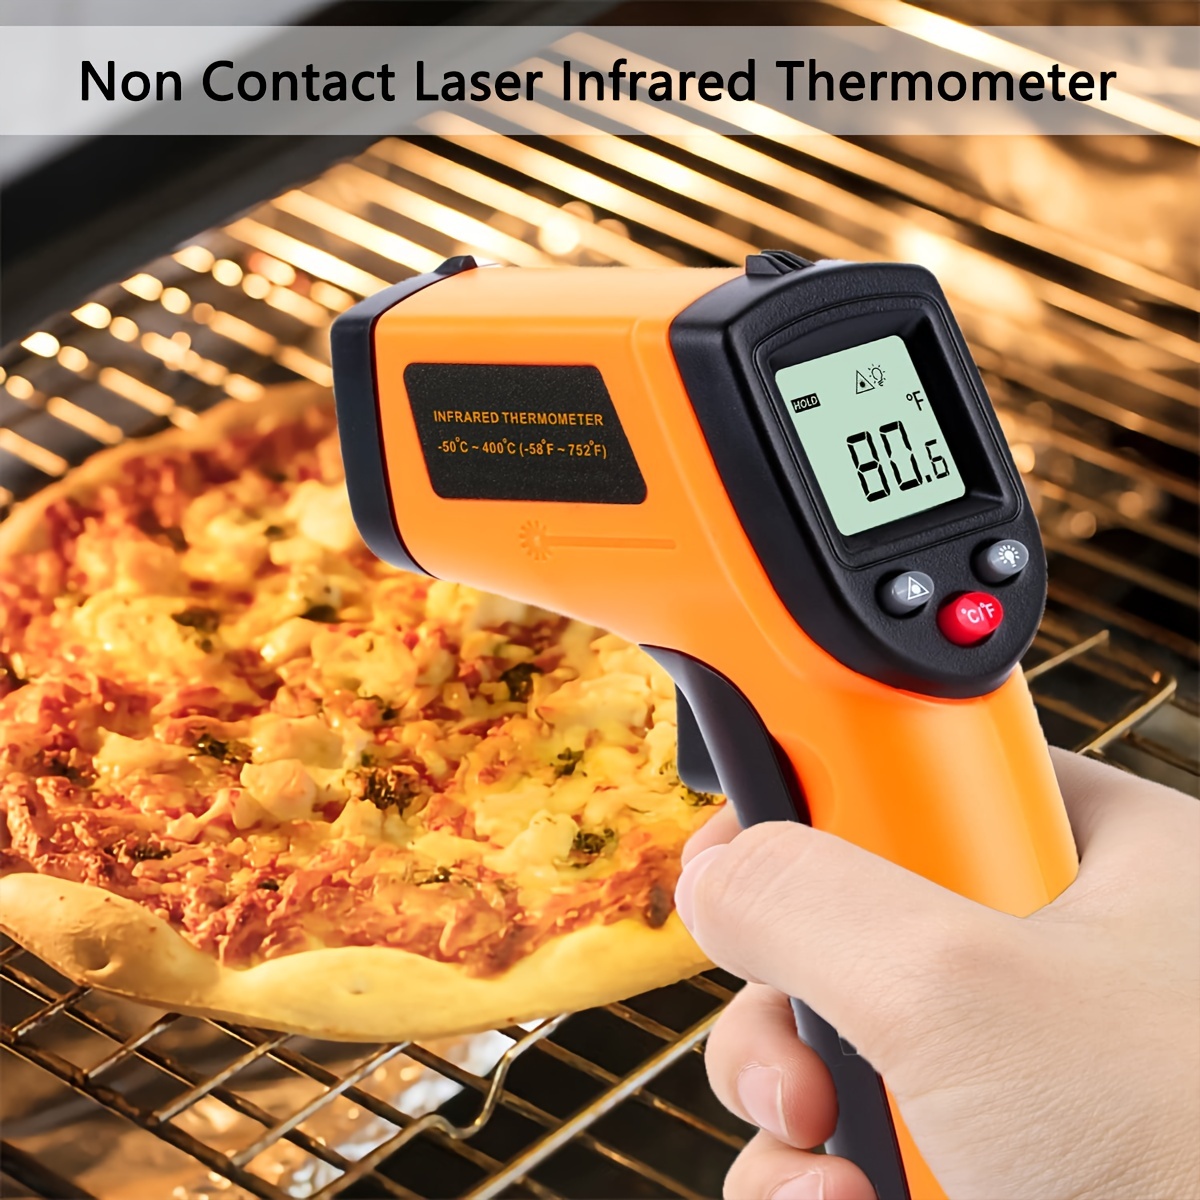 Digital Laser Infrared Thermometer